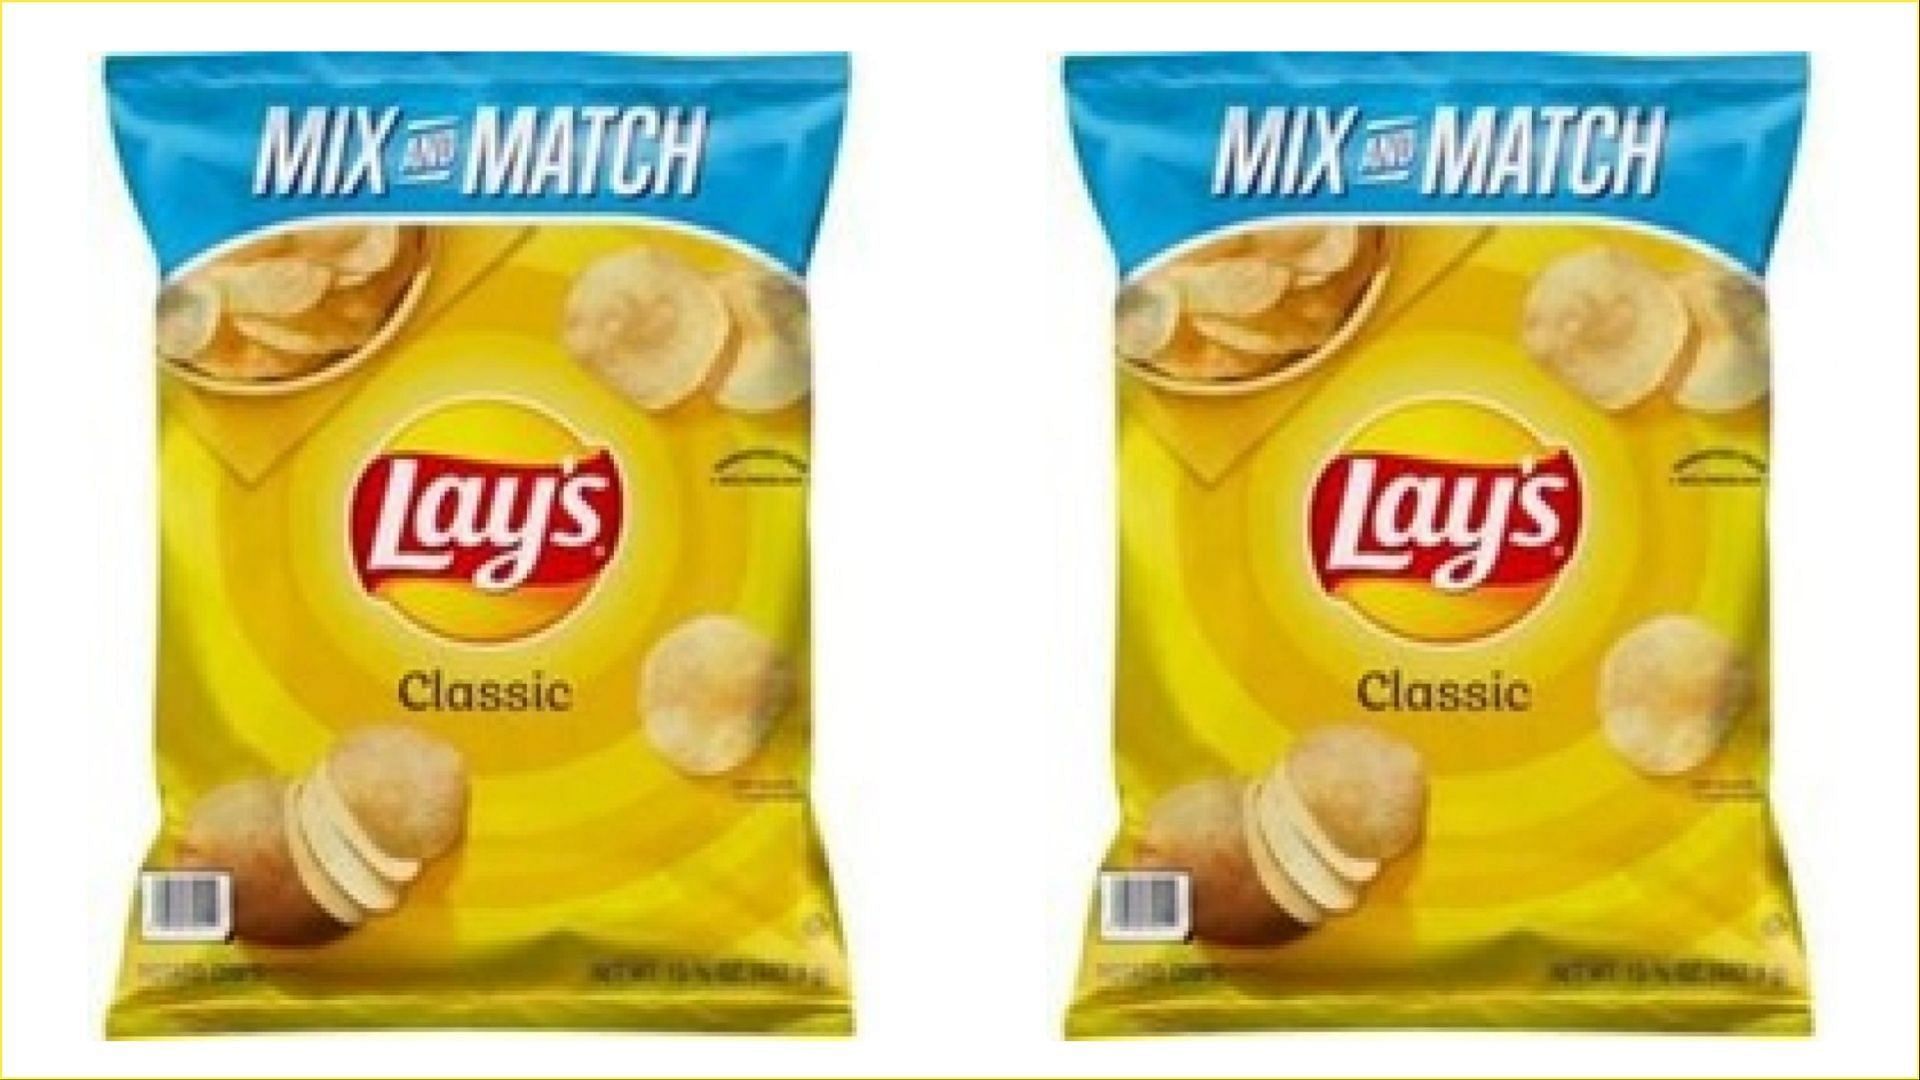 The recalled Lays Classic Mix and Match Potato Chips may contain undeclared milk allergens posing allergy risks (Image via FDA)